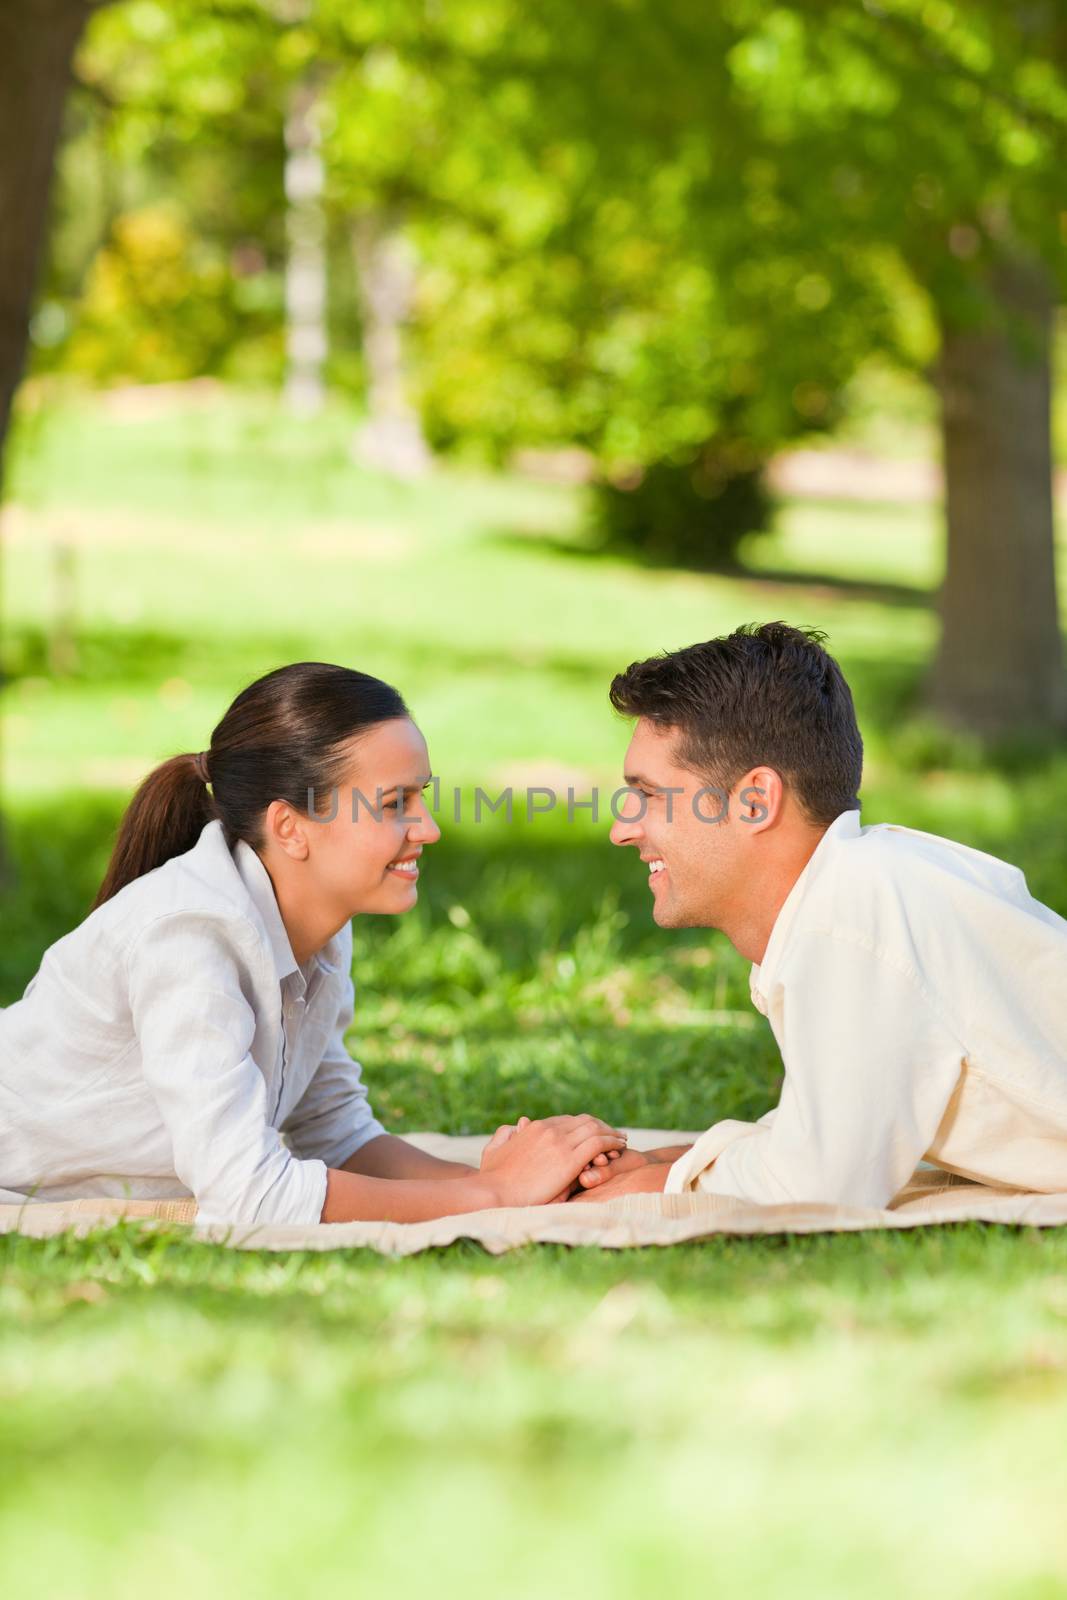 Lovely couple in the park by Wavebreakmedia